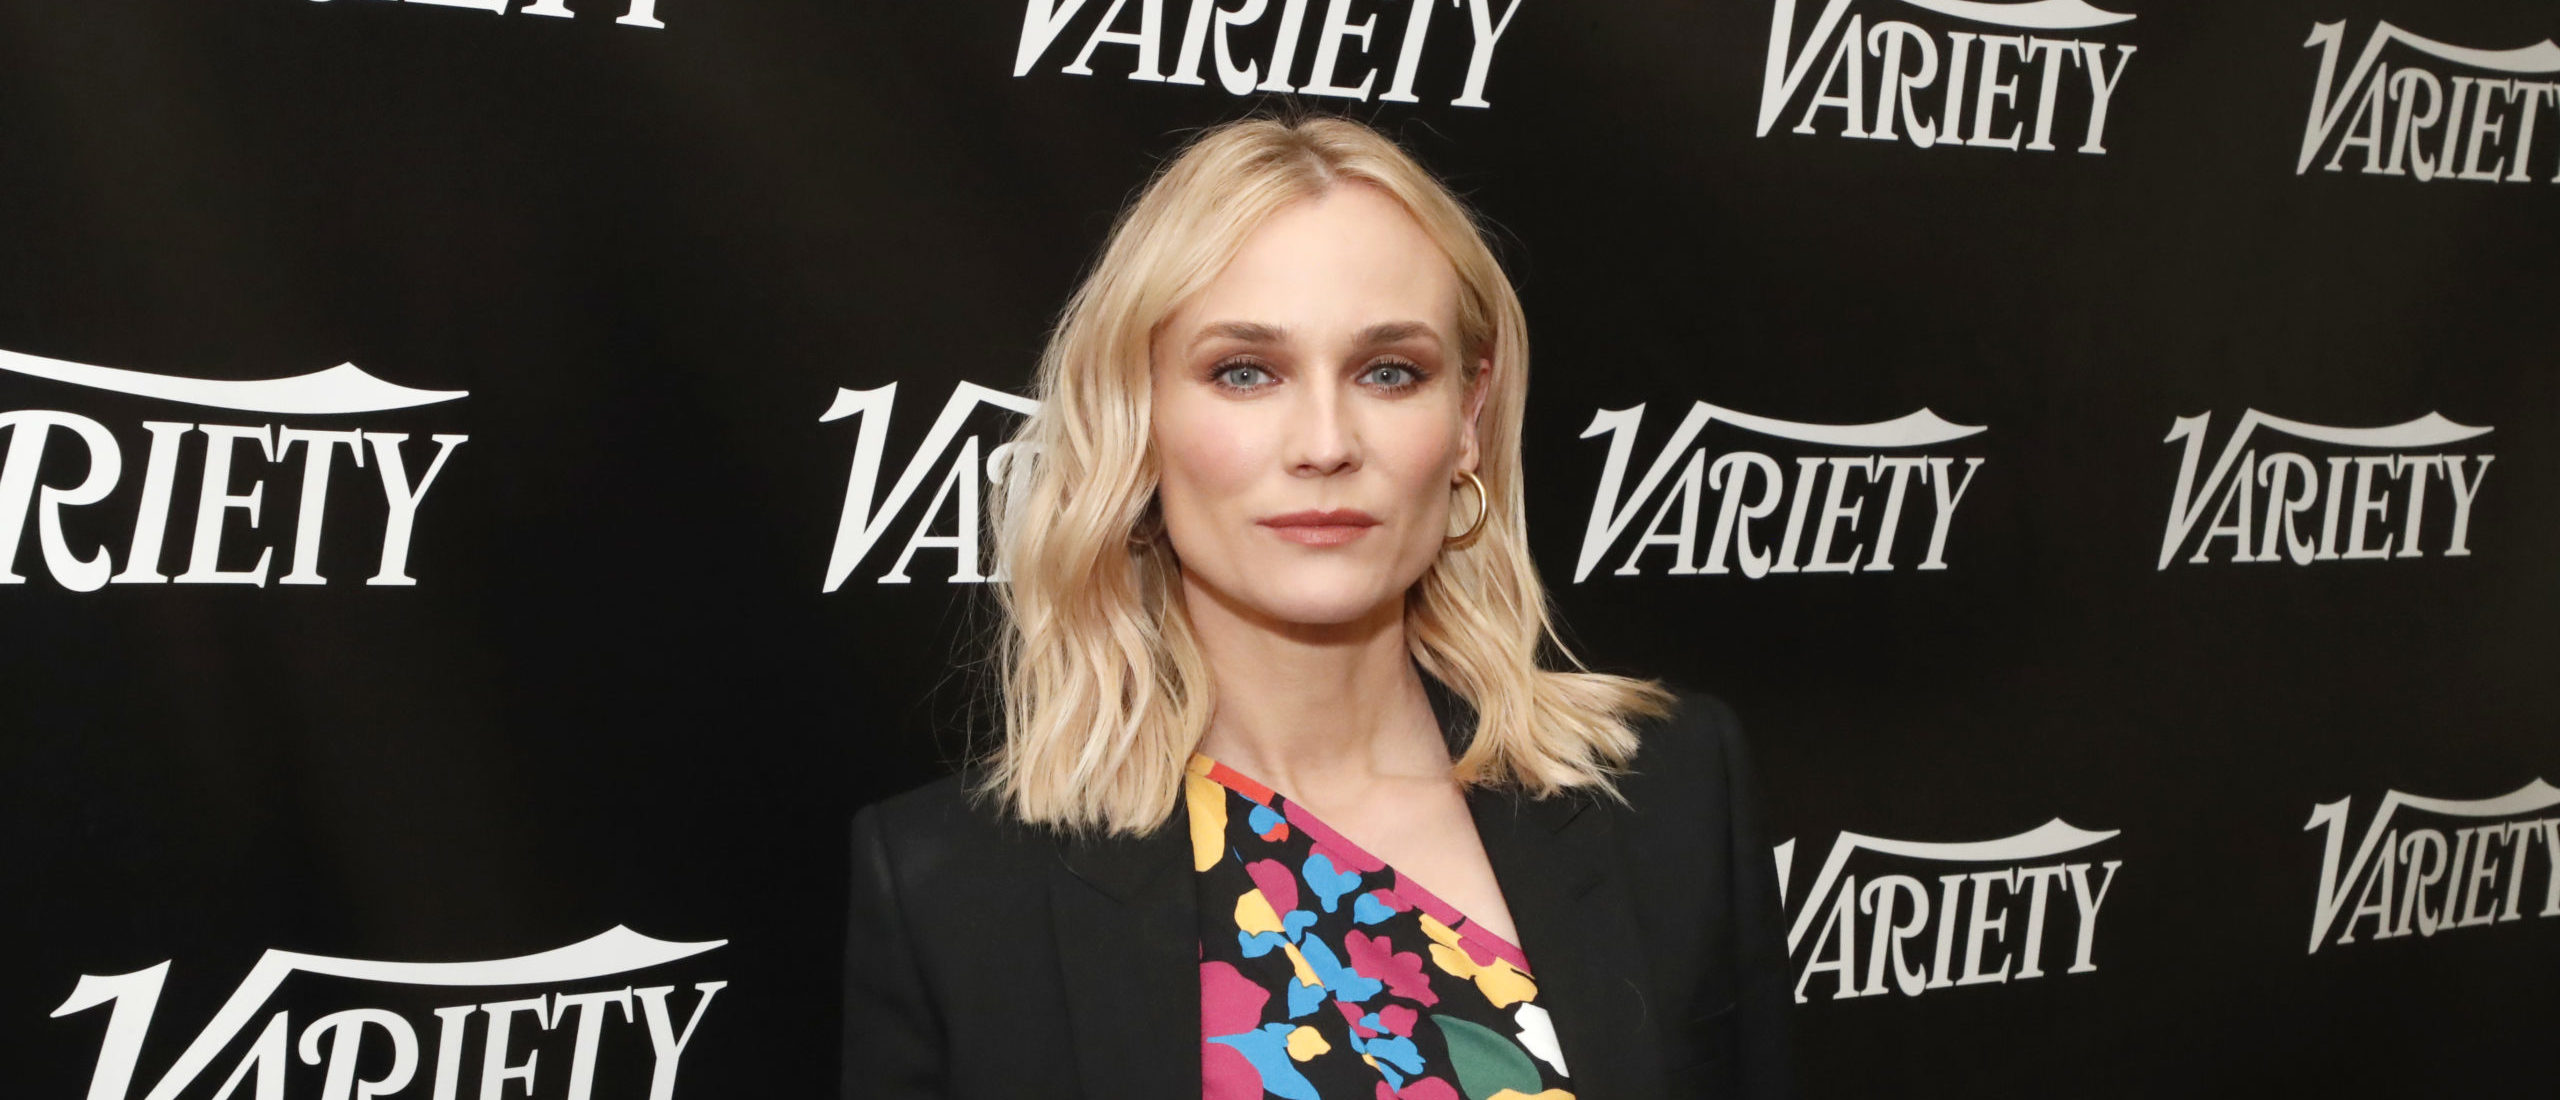 Troy Movie Screen Test Made Diane Kruger Feel Like Meat